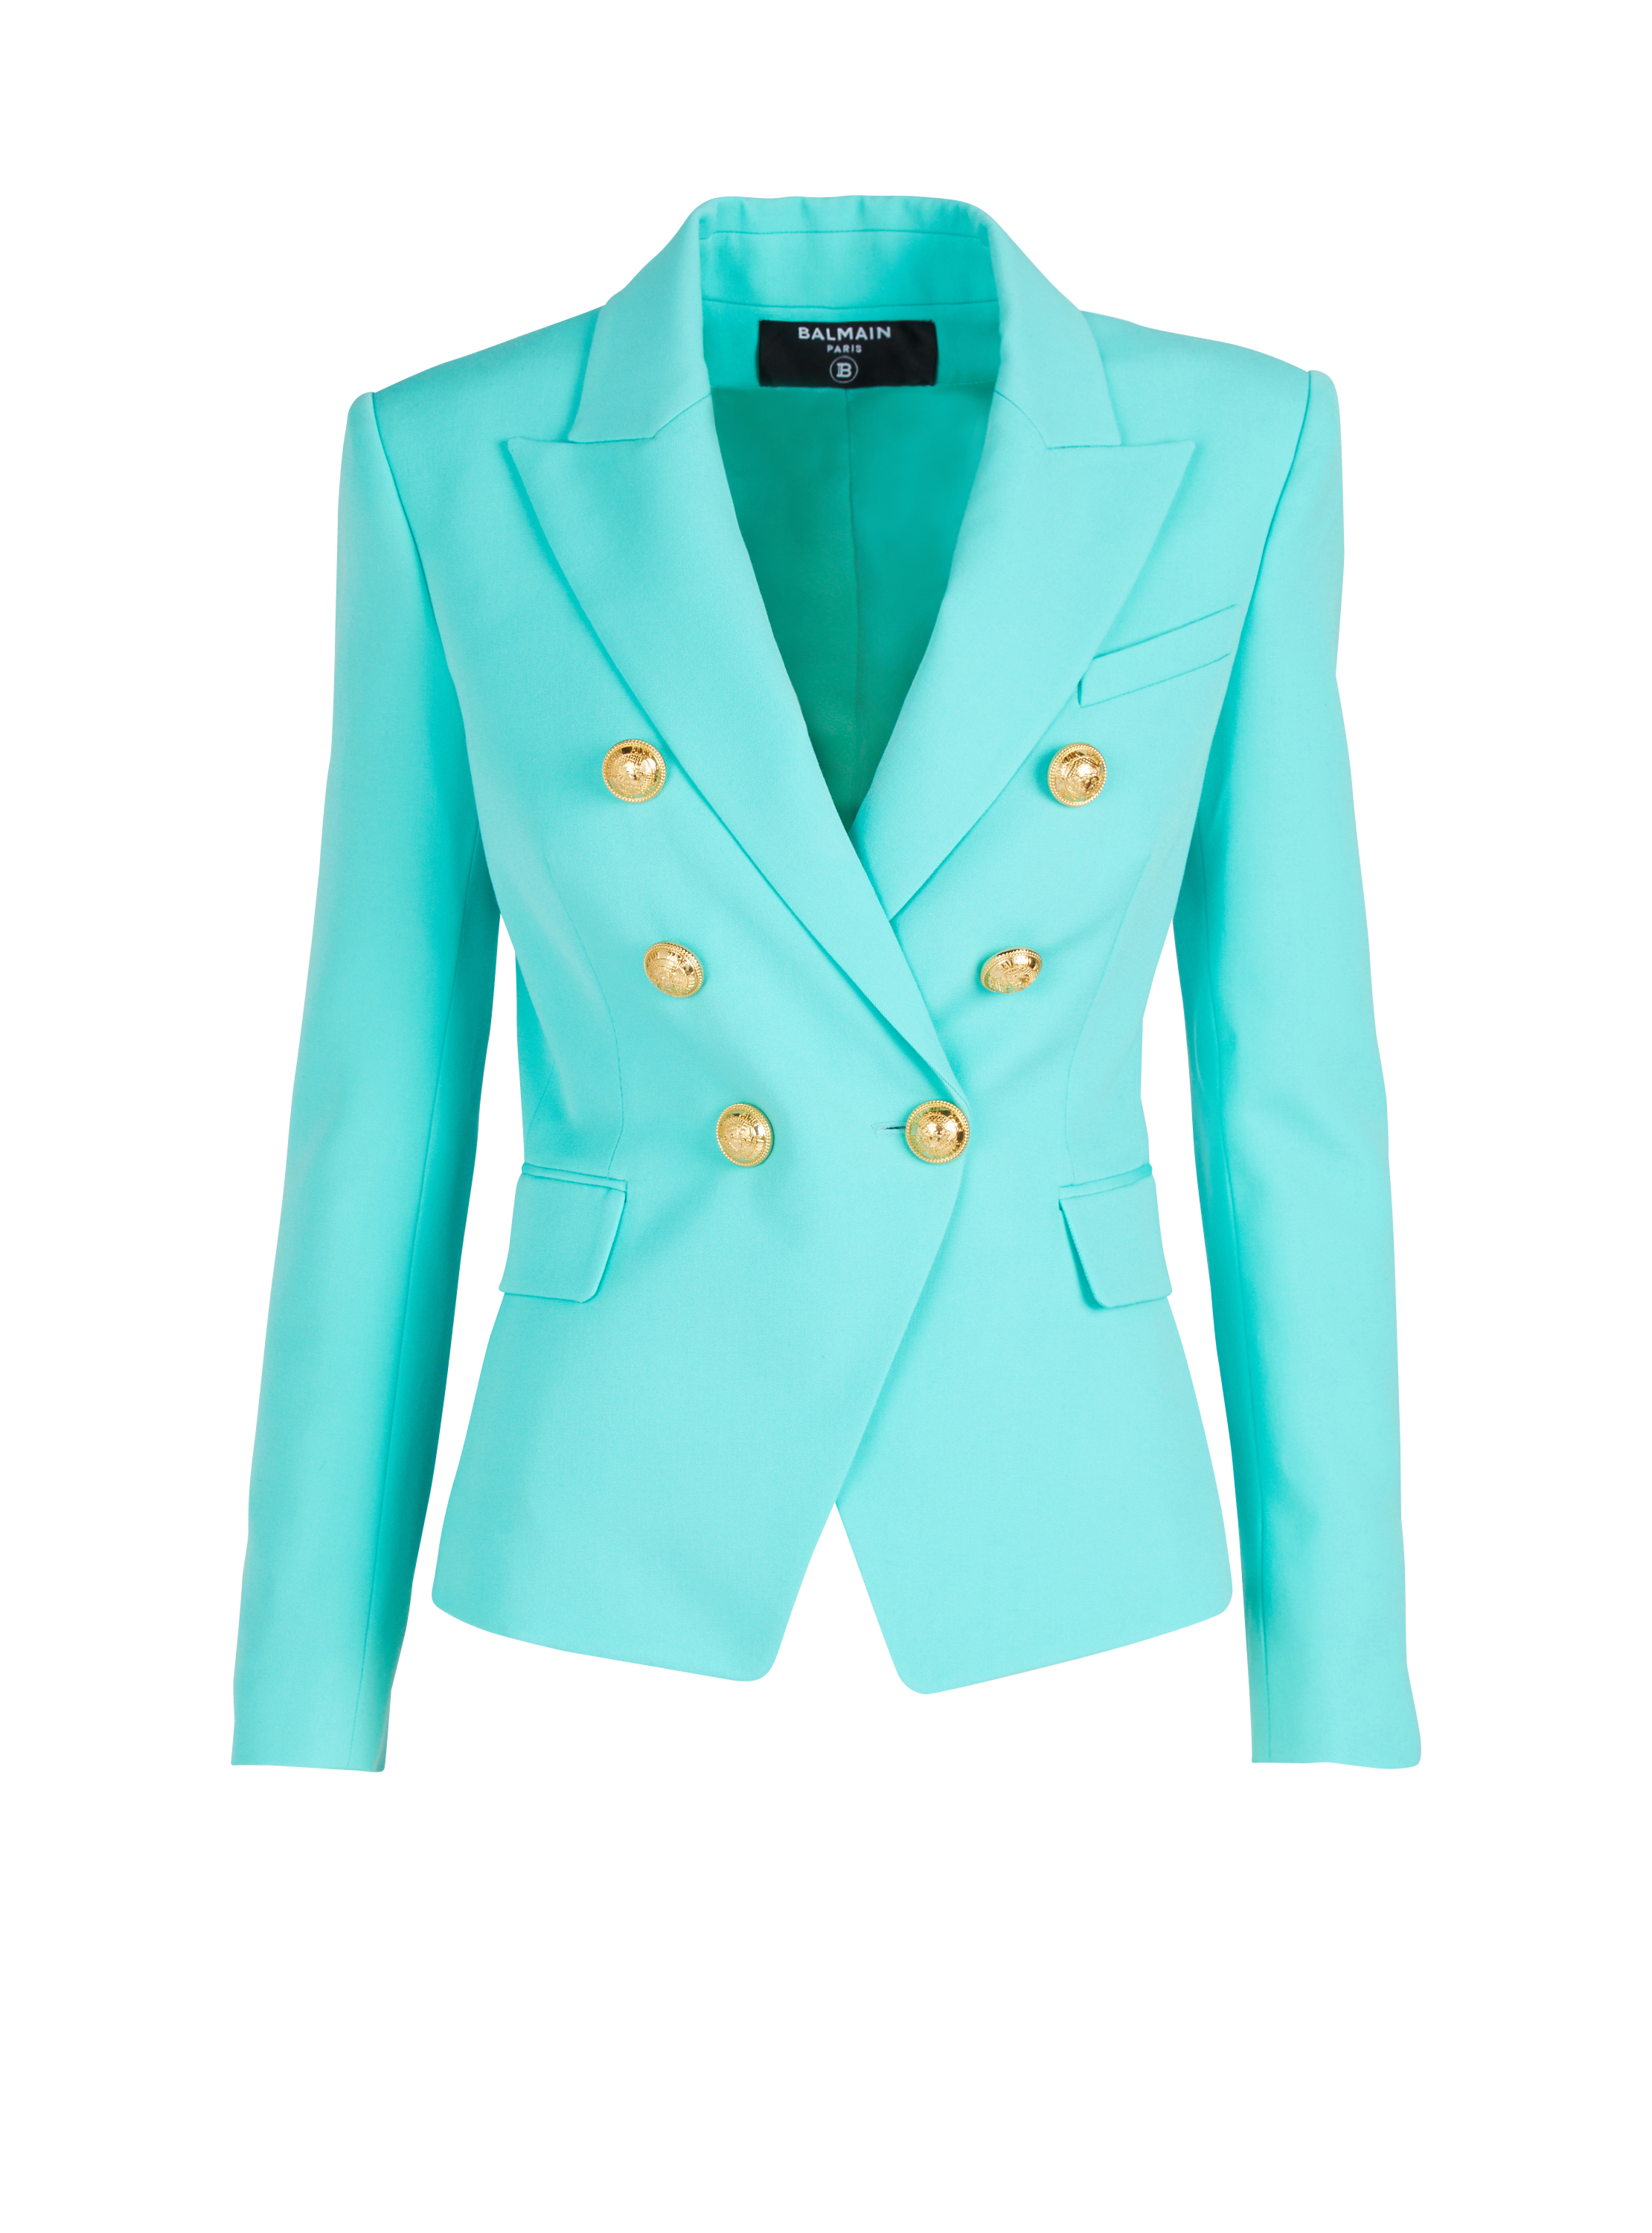 Classic 6-button jacket